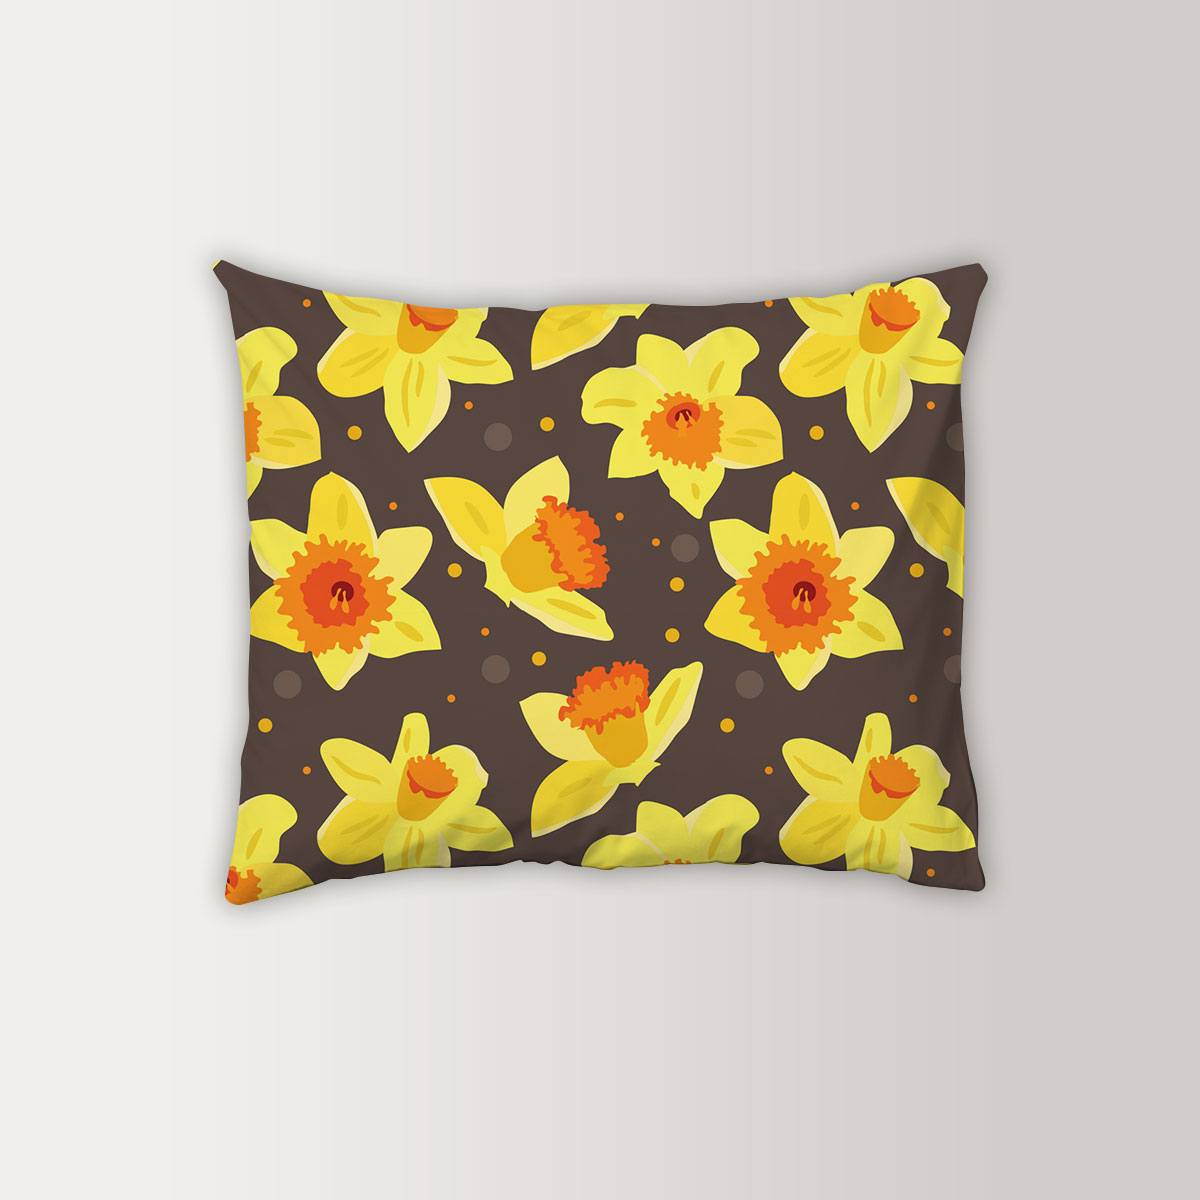 Yellow Daffodils On Brown Background Pillow Case